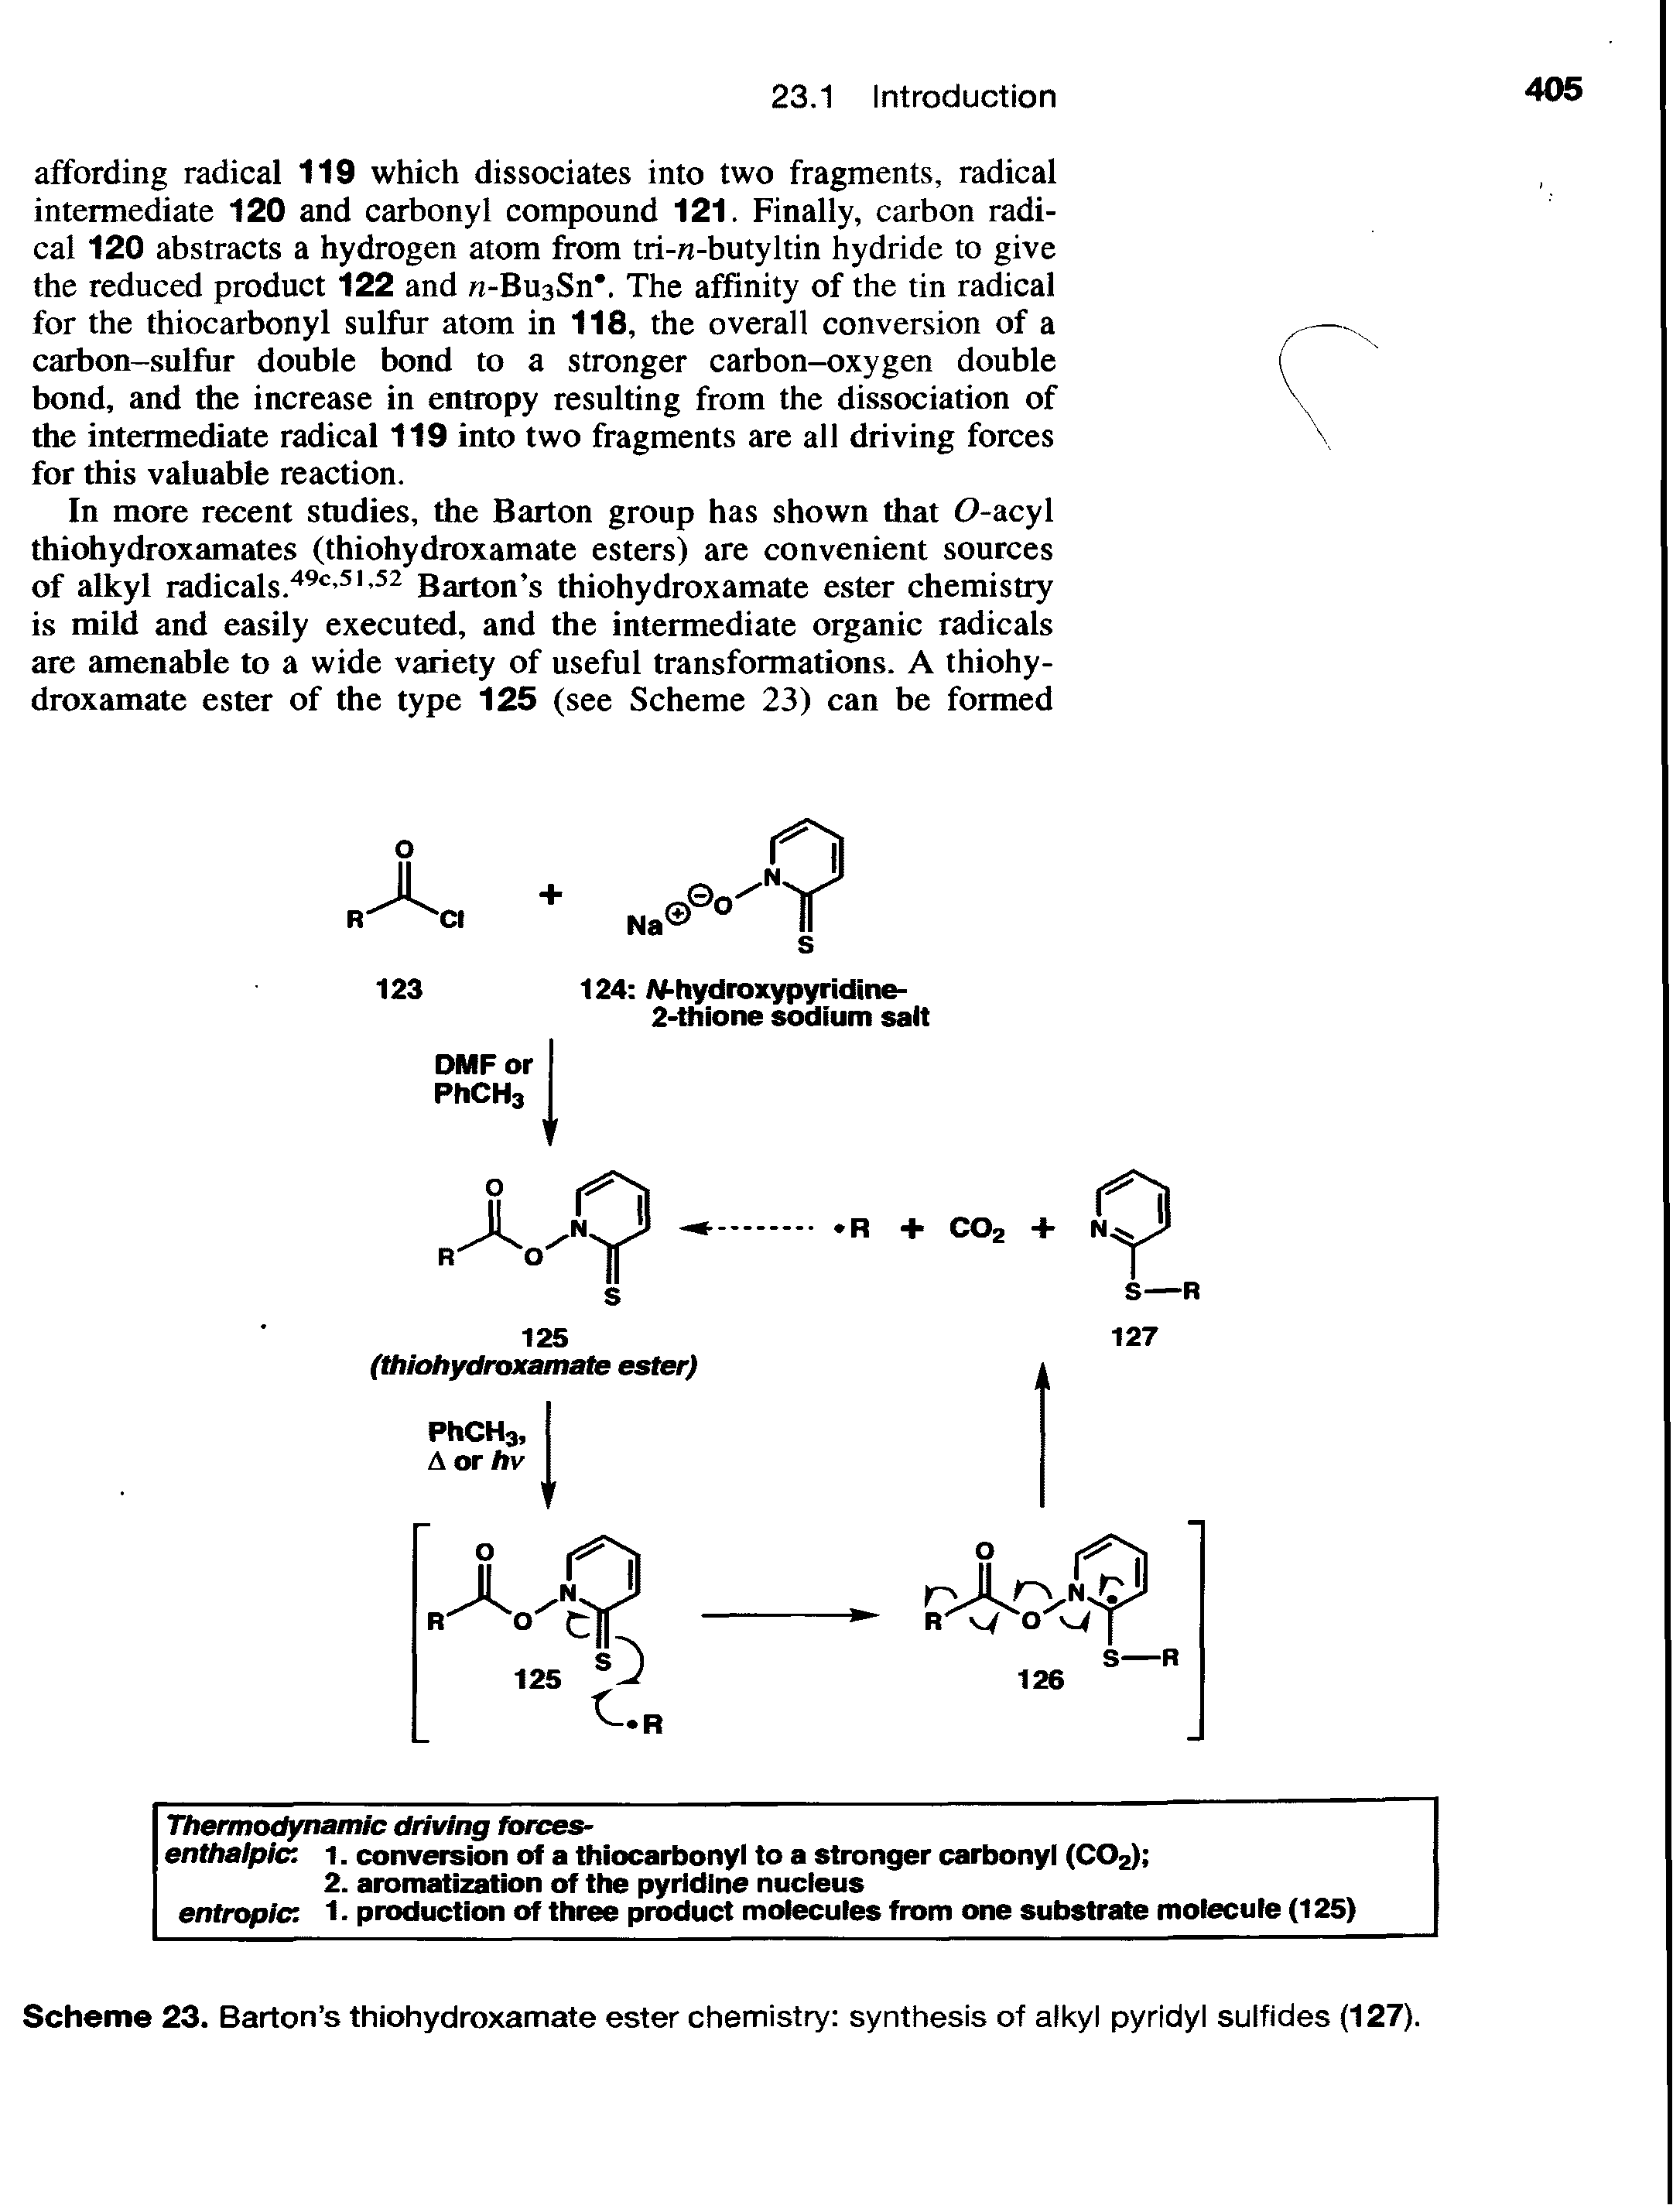 Scheme 23. Barton s thiohydroxamate ester chemistry synthesis of alkyl pyridyl sulfides (127).